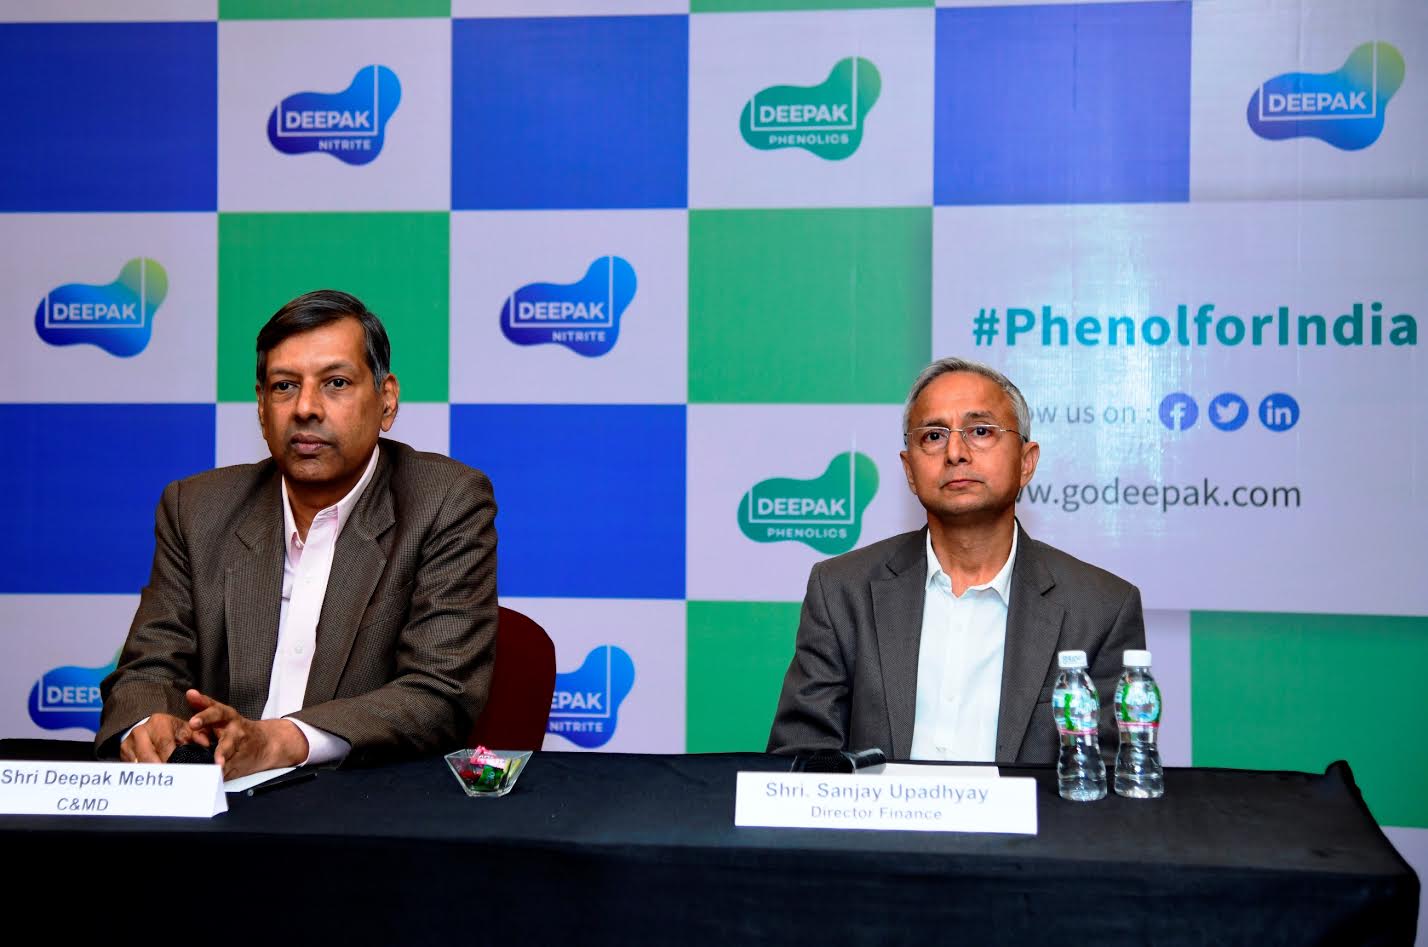 Largest Indian Phenol and Acetone plant of India in Gujarat by Deepk Nitrite likely to save $400 million of foreign exchange on import front annually